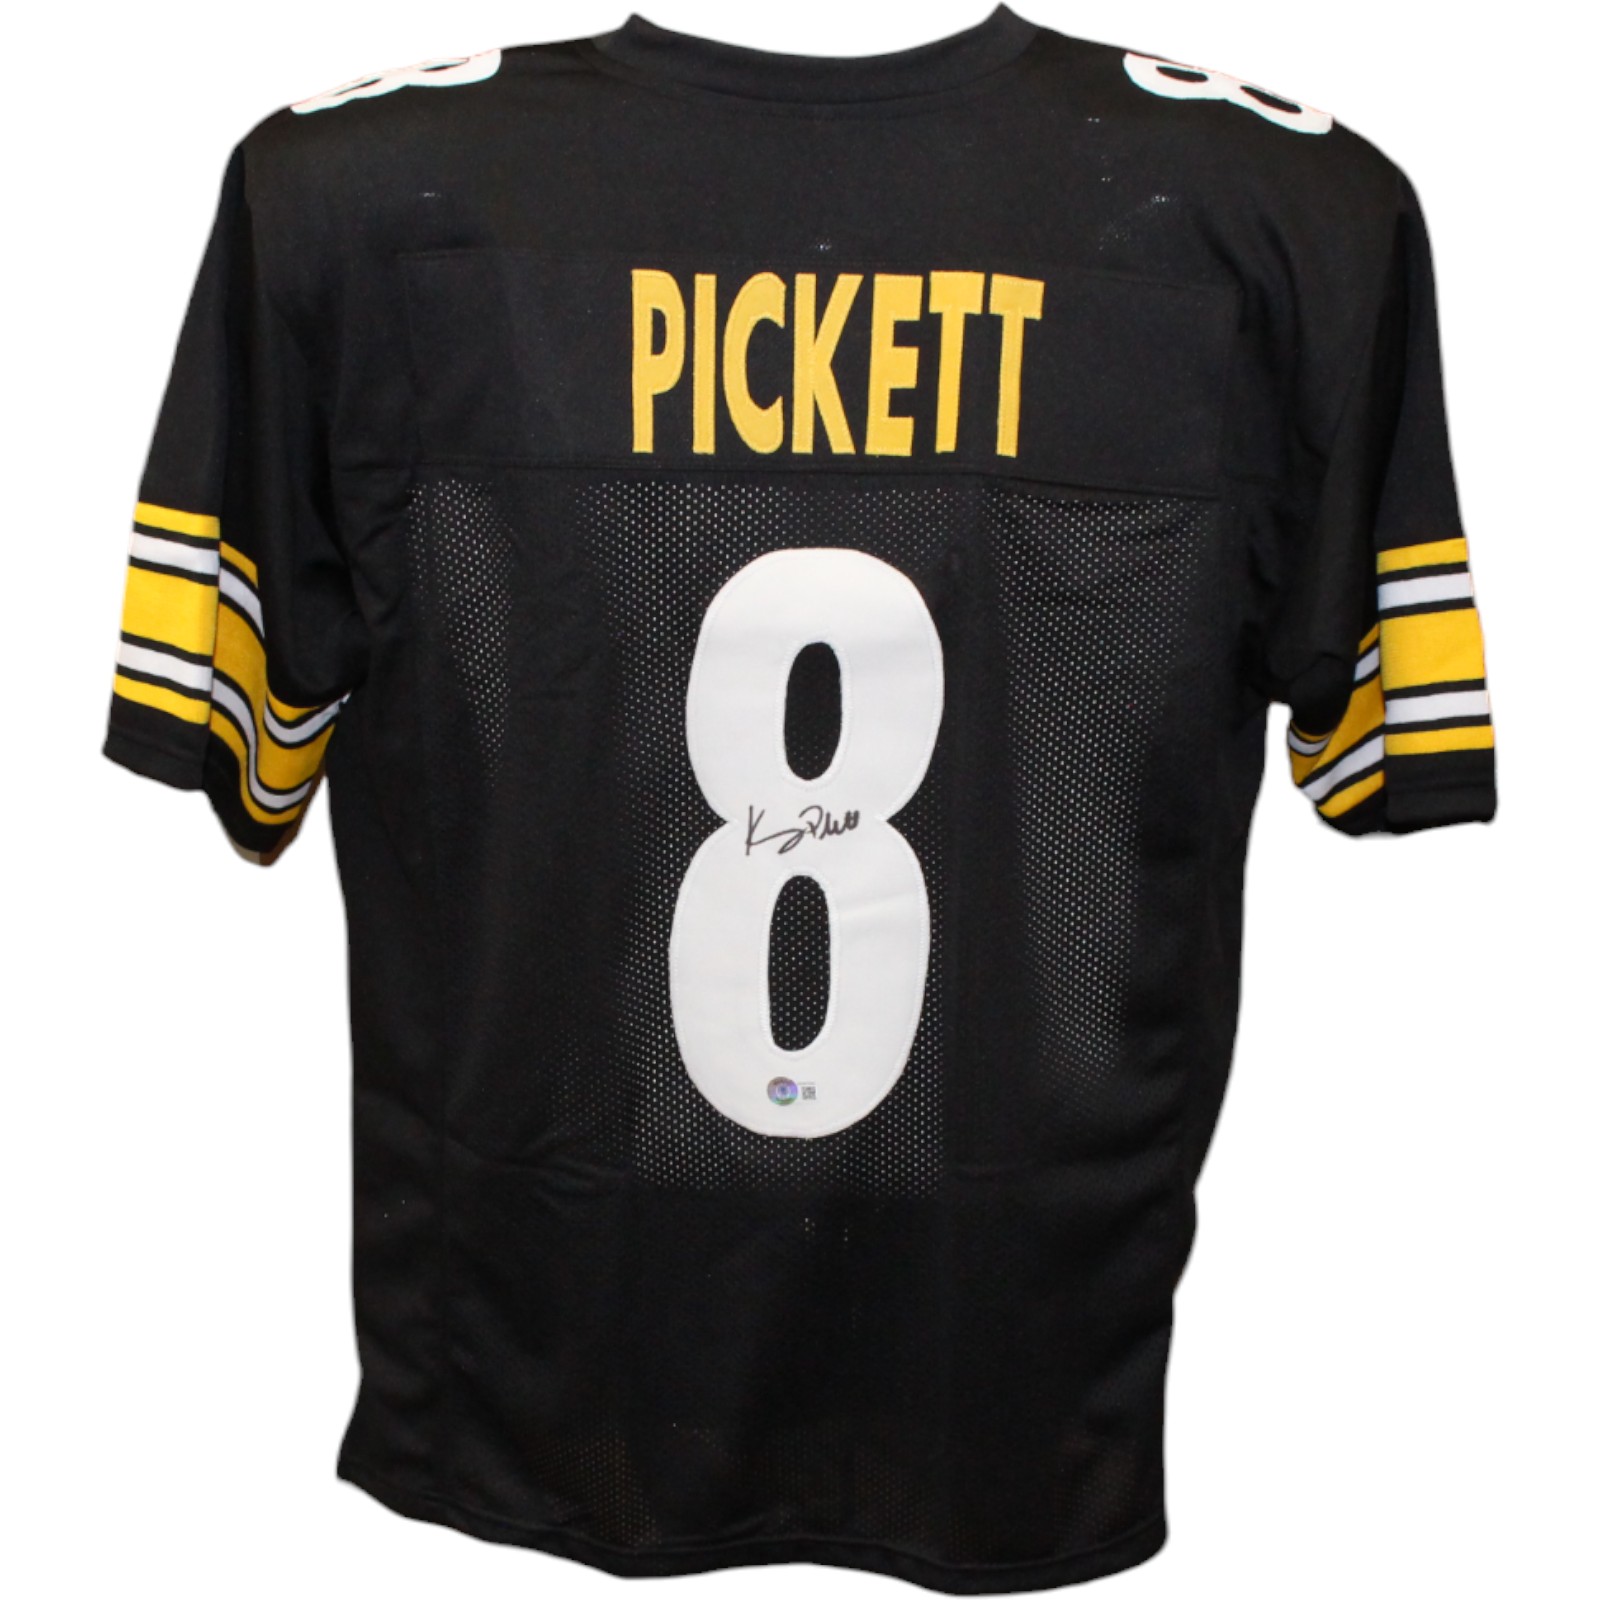 Kenny Pickett Autographed/Signed Pro Style Black Jersey Beckett